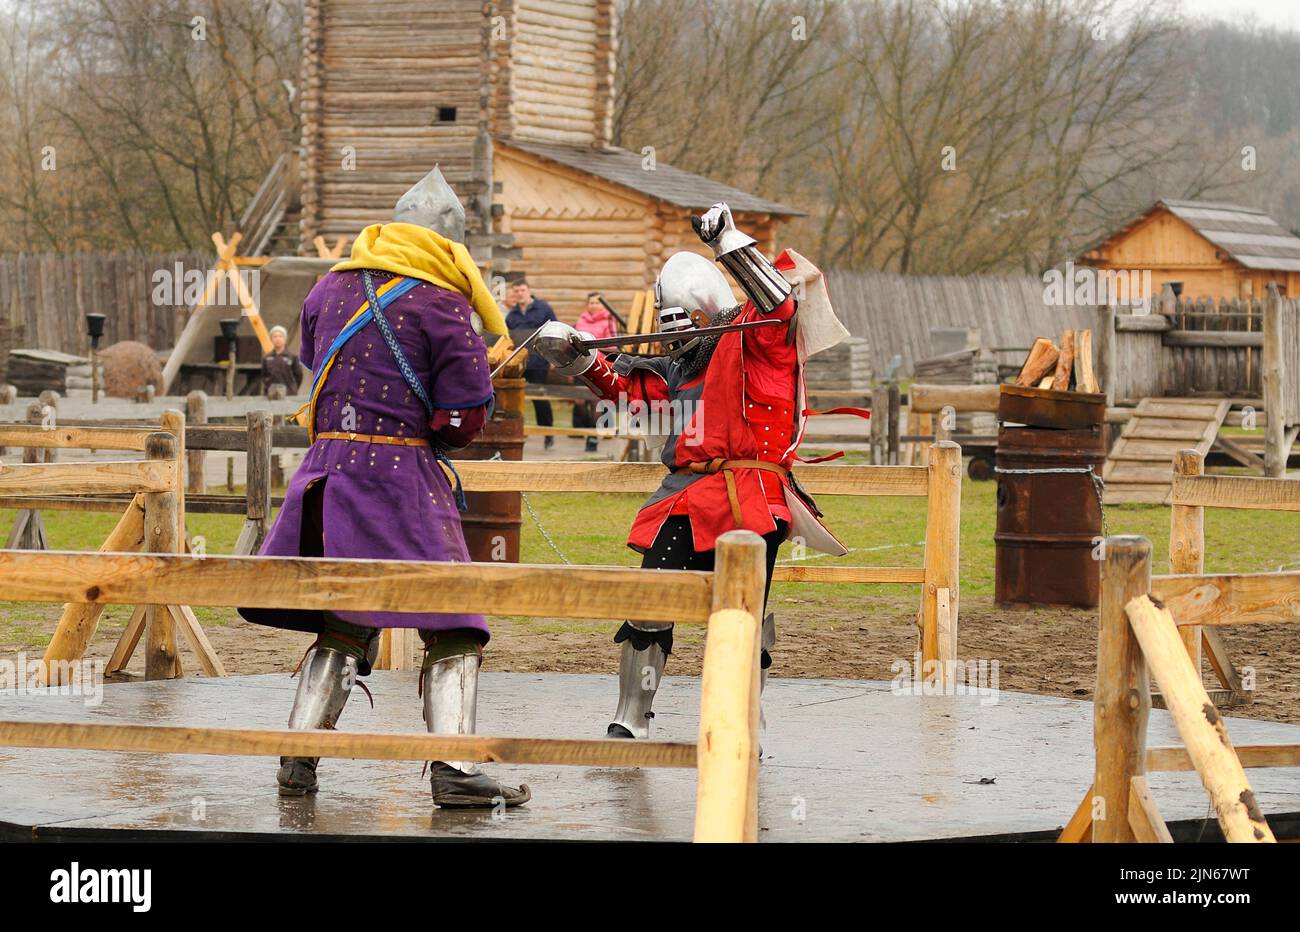 Men reenactors in metal armor of an Old Rus knights reconstructing sword fight, wooden fortress on a background. Kyiv Rus park, Ukraine Stock Photo